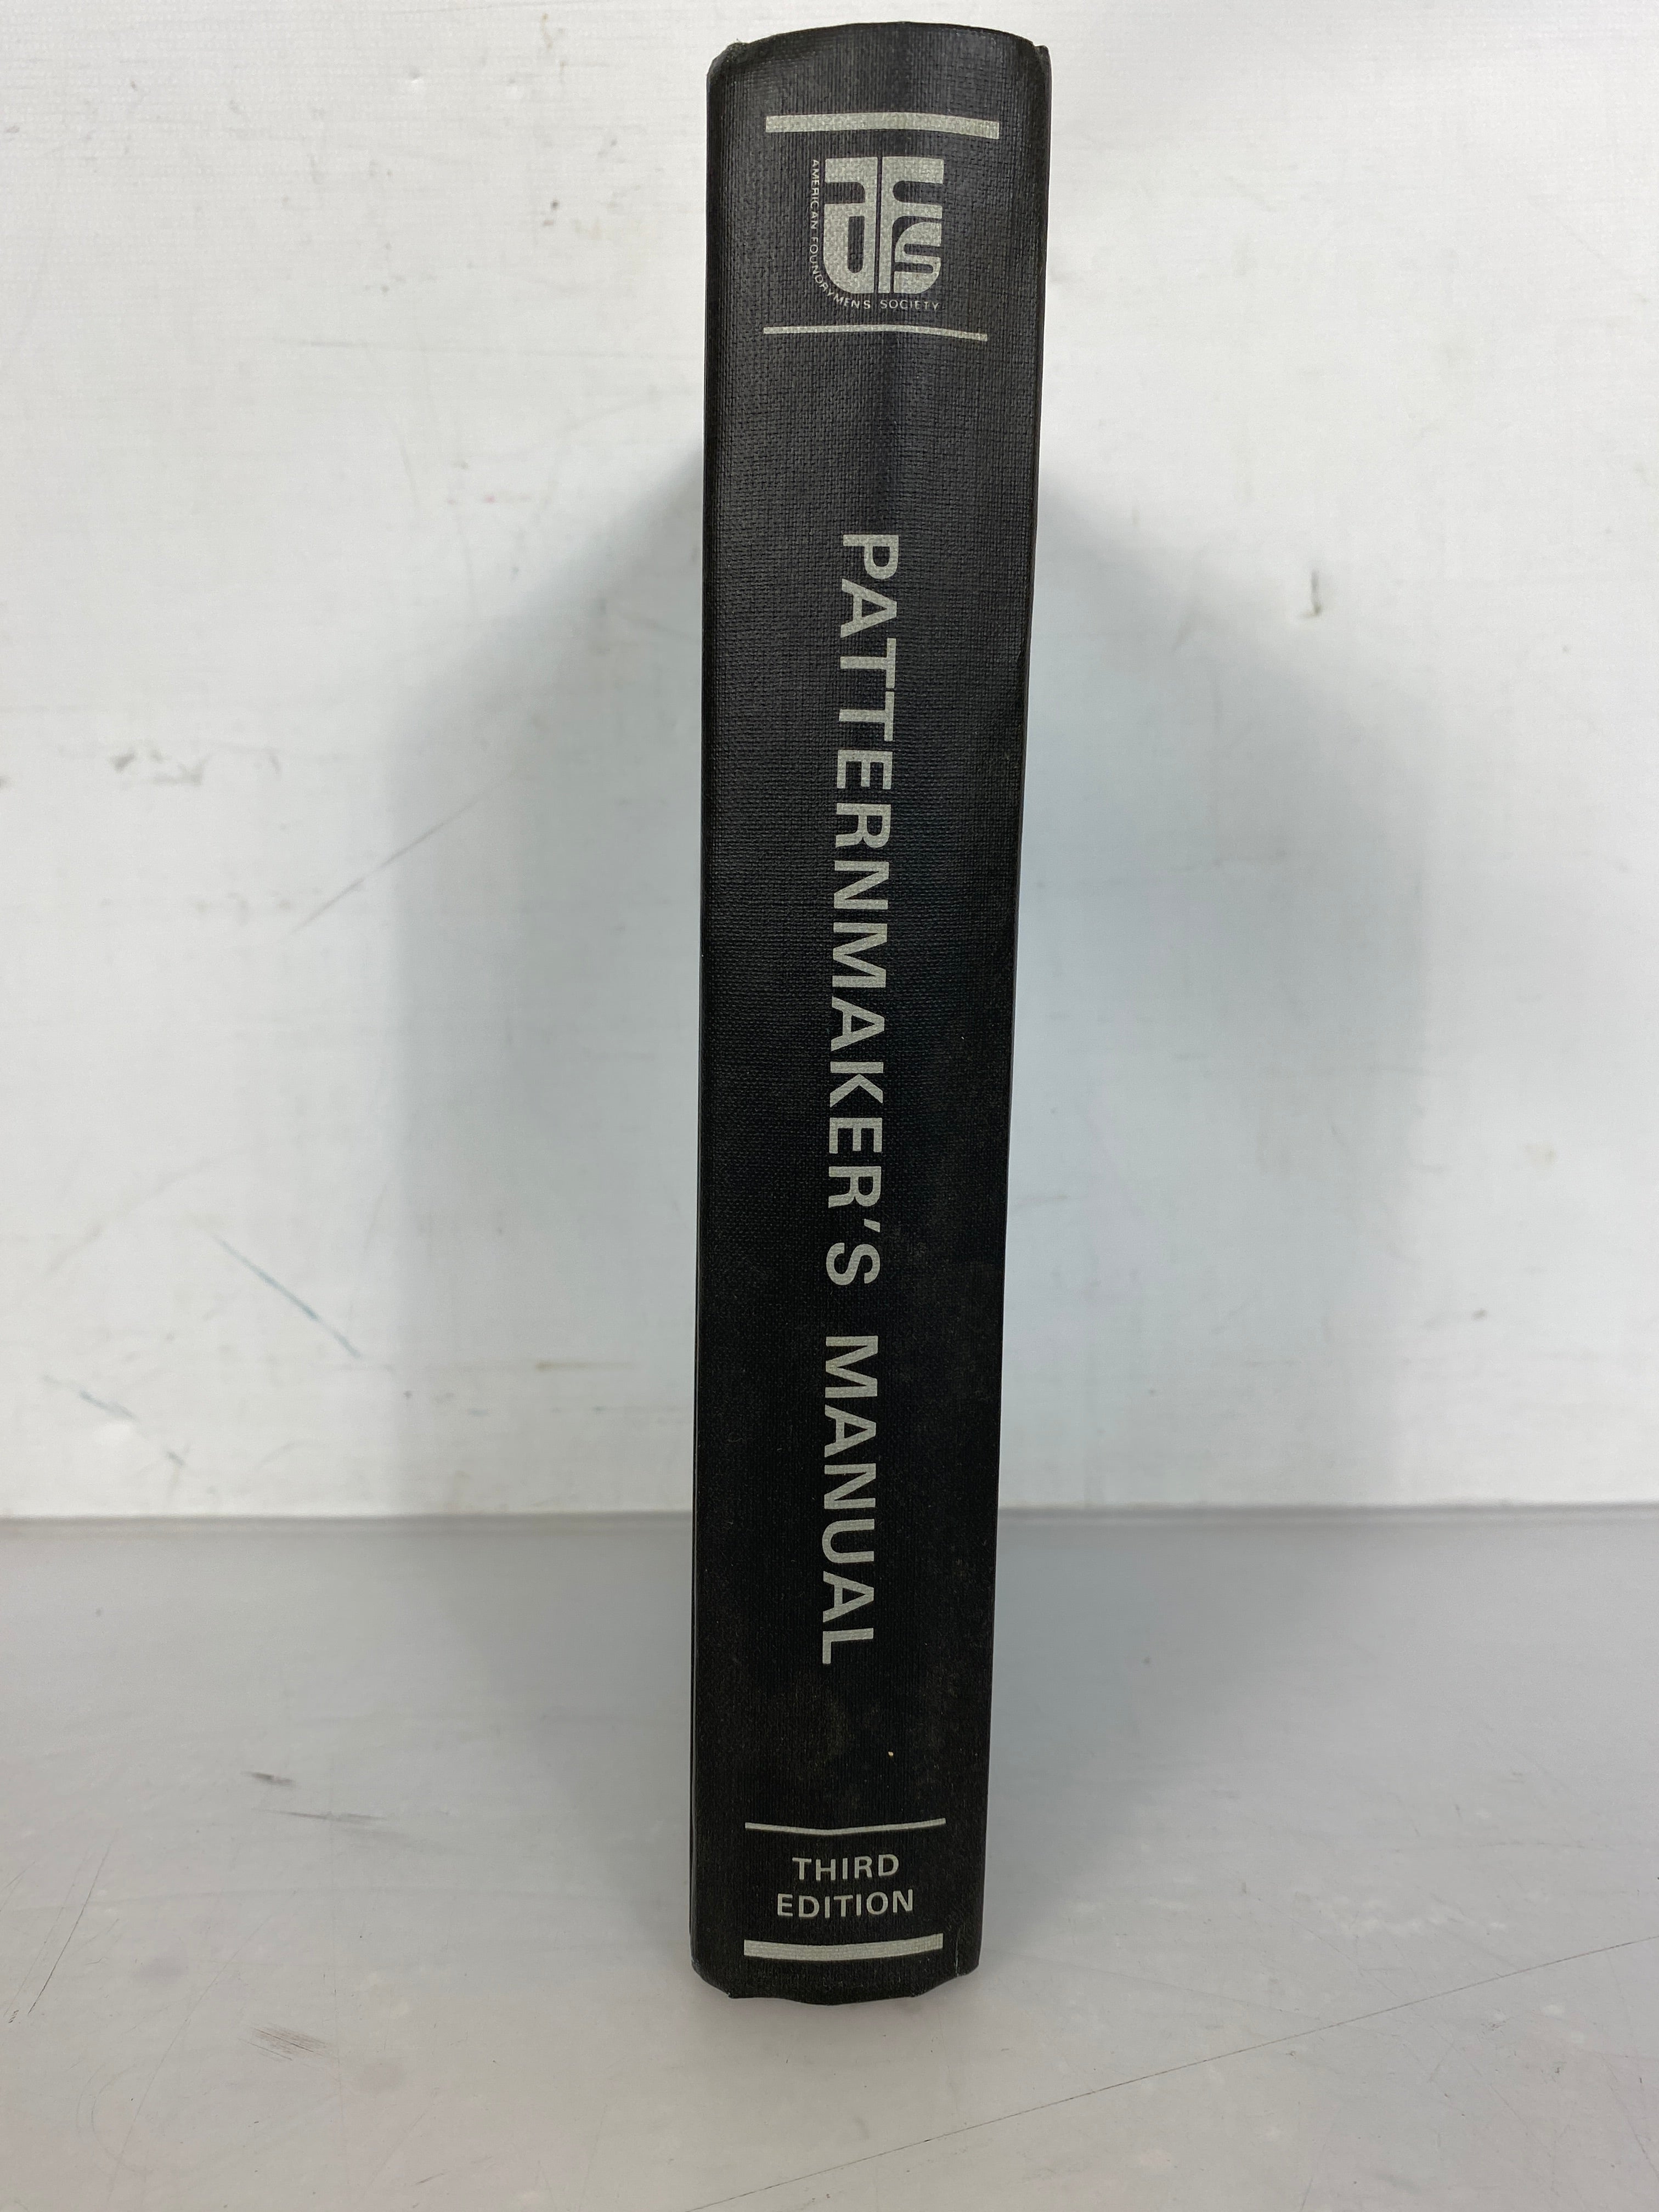 Pattern Maker's Manual 1970 Revised Edition American Foundrymen's Society HC